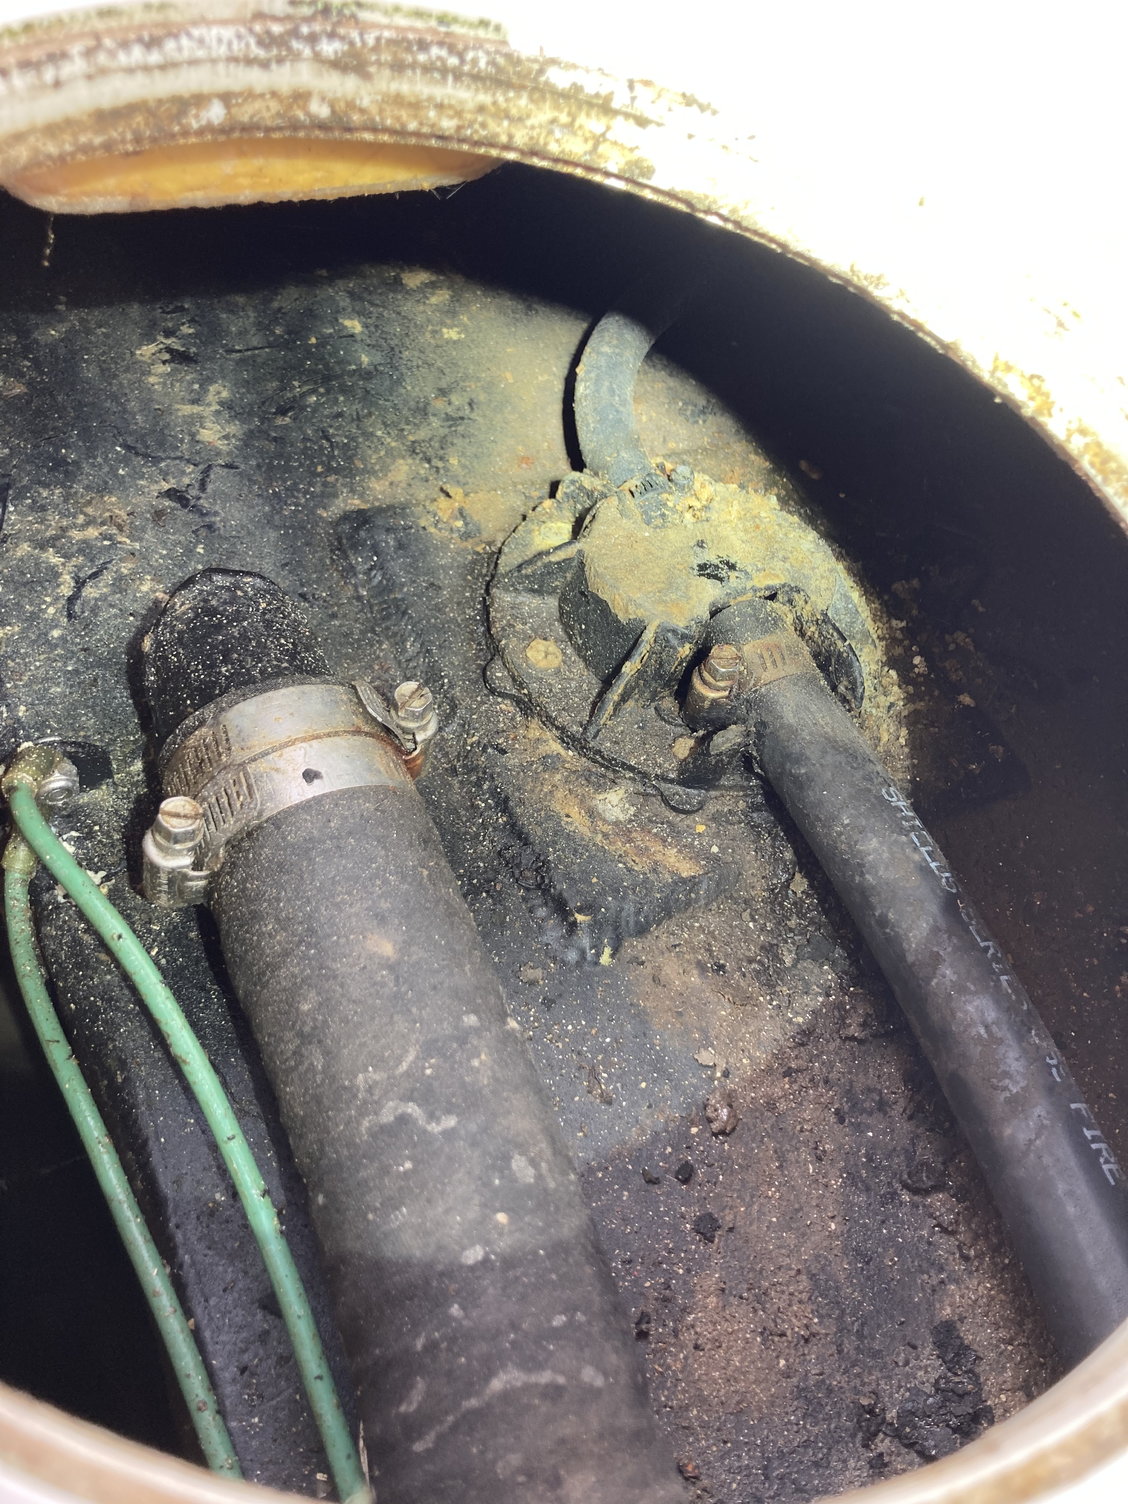 Anti siphon valve question [issue with gas tank] - The Hull Truth - Boating  and Fishing Forum